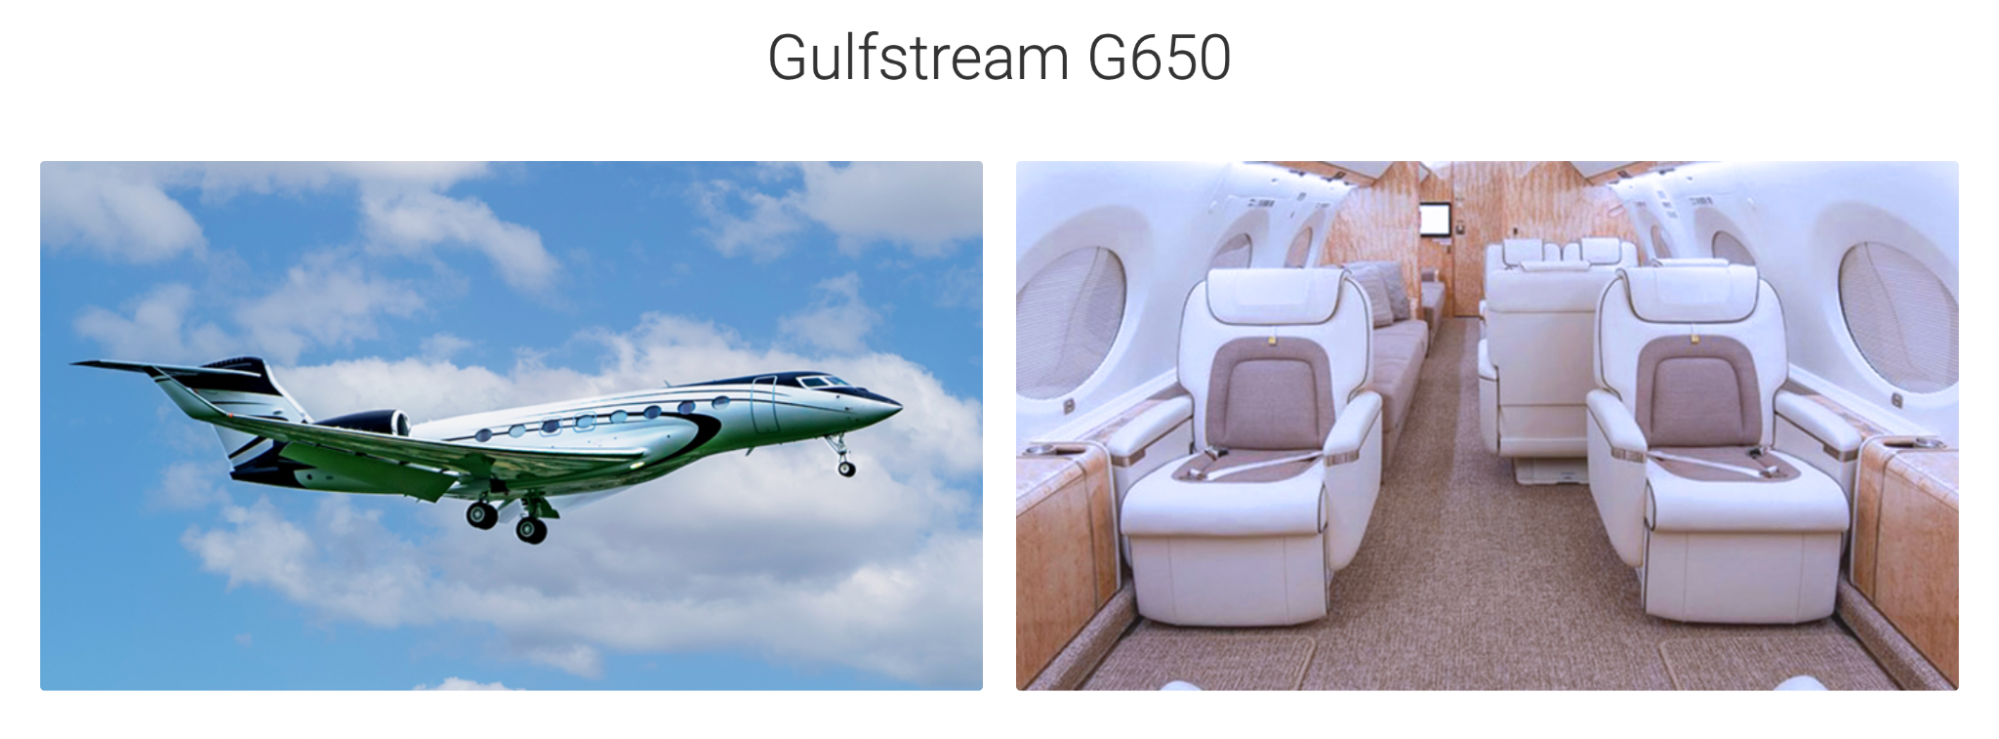 An image showing the exterior and interior of the VIP airliner Gulfstream G650.